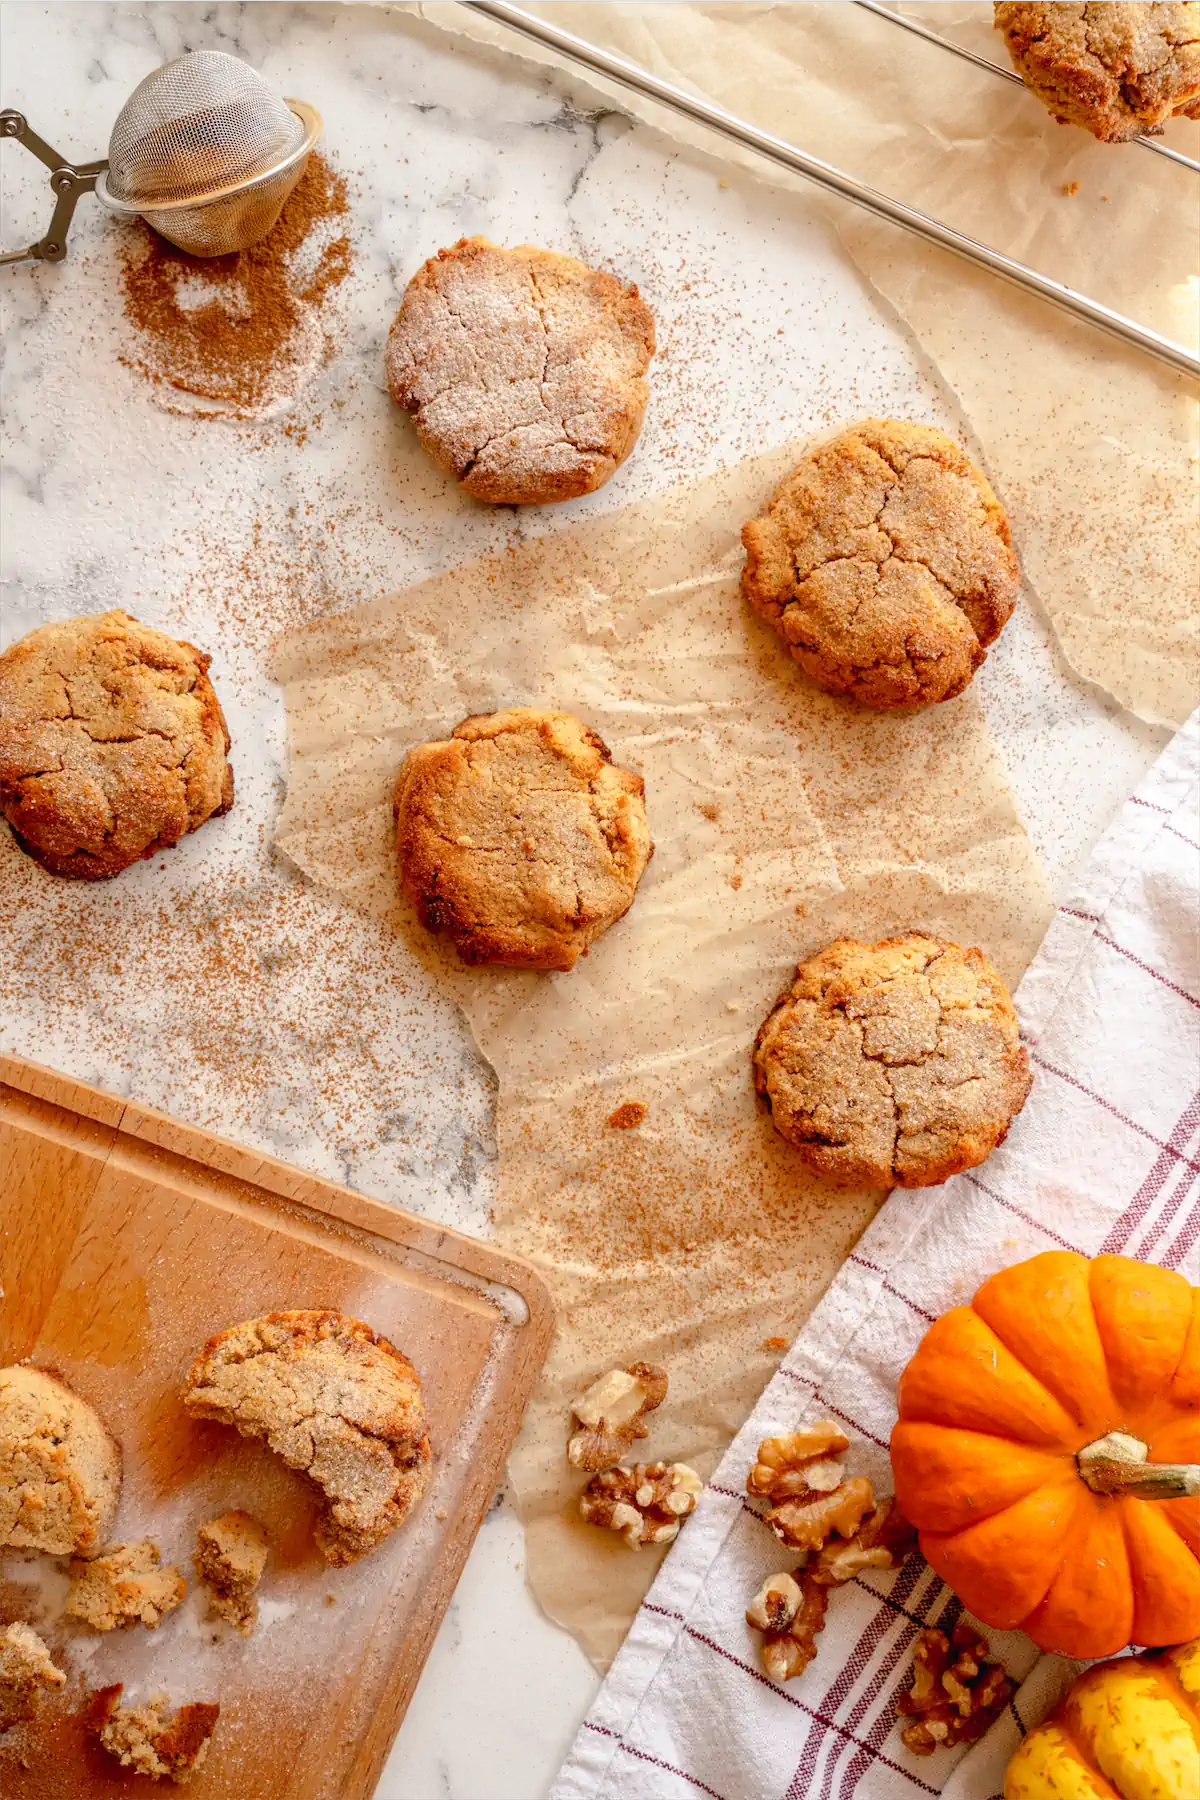 Homemade keto pumpkin spice cookies artfully presented on the table.